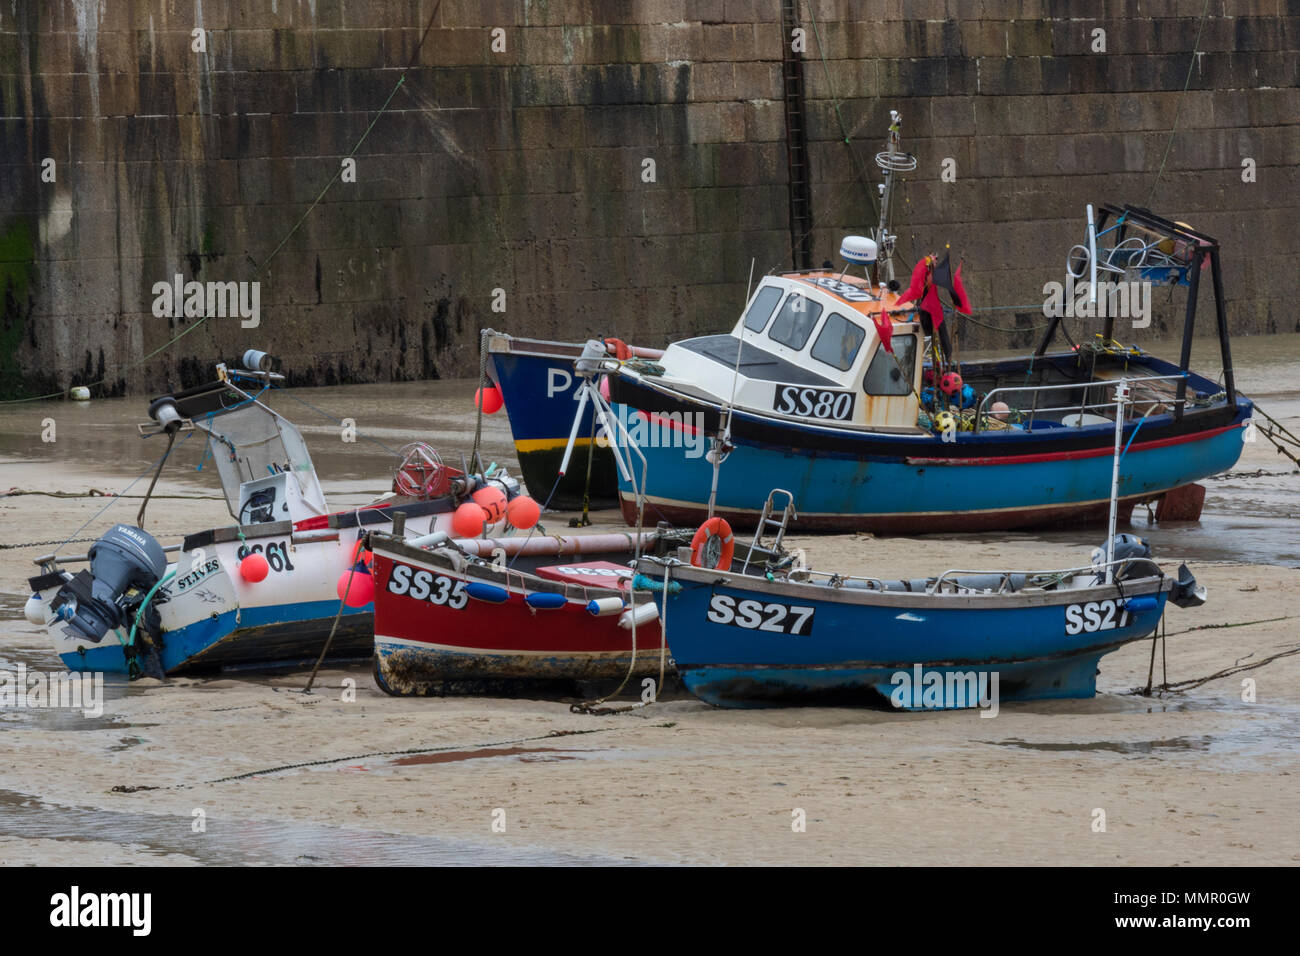 Traditional and colourful fishing boats on the sandy harbour in st Ives in cornwall high and dry at low tide. Inshore fishing craft beached on shore. Stock Photo